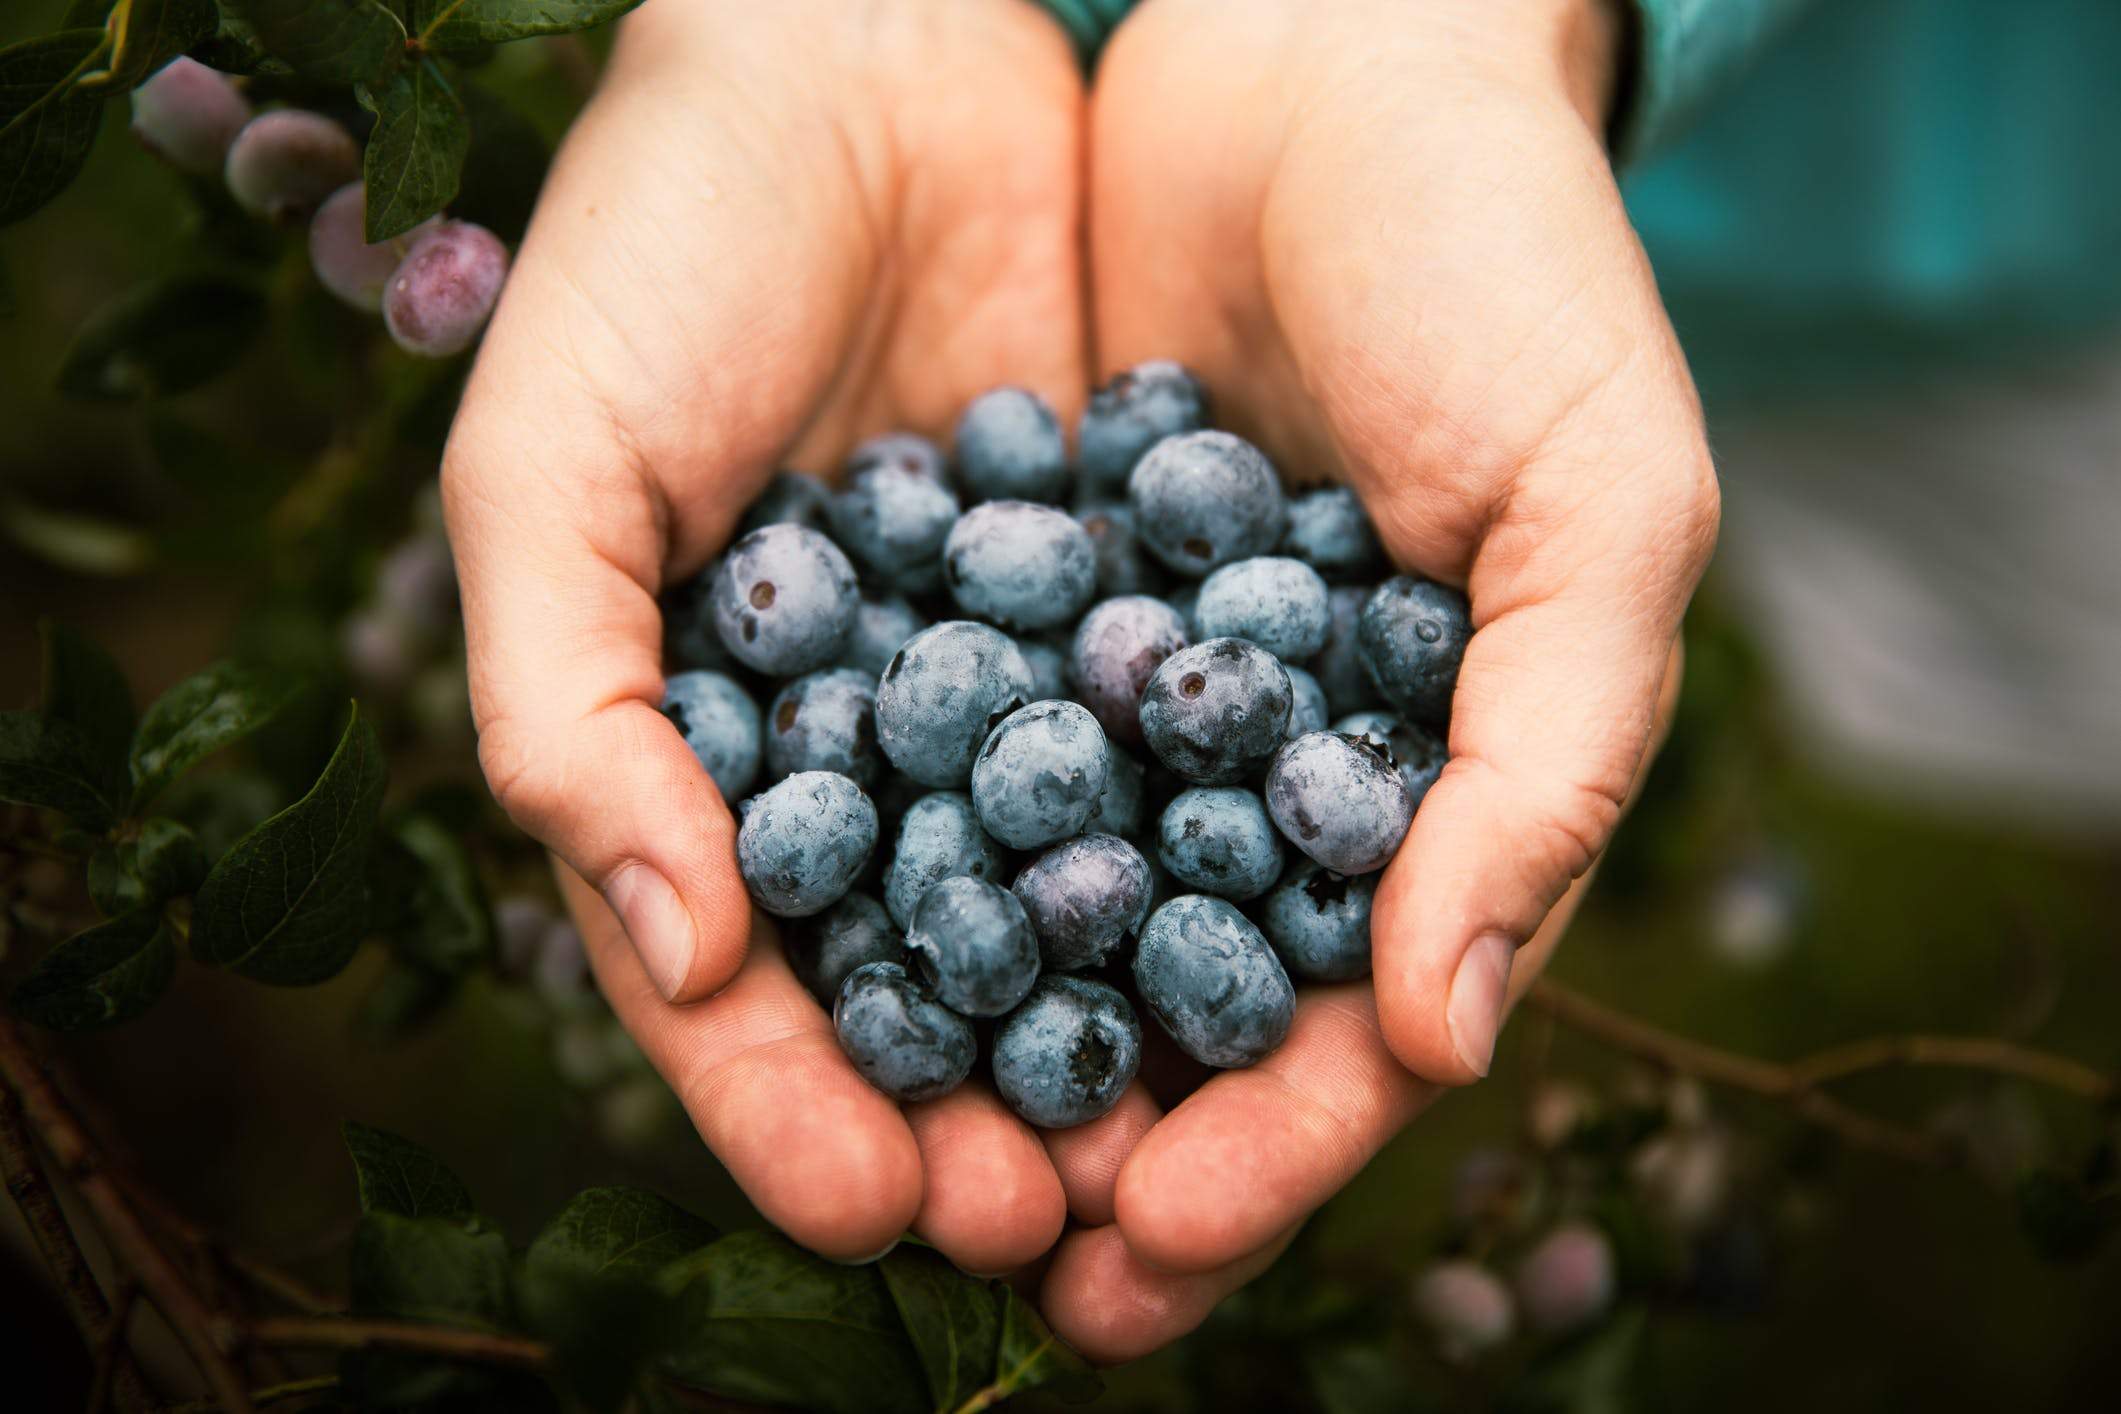 Blueberries: Are They the Next Big Thing in Nutritional Supplements?